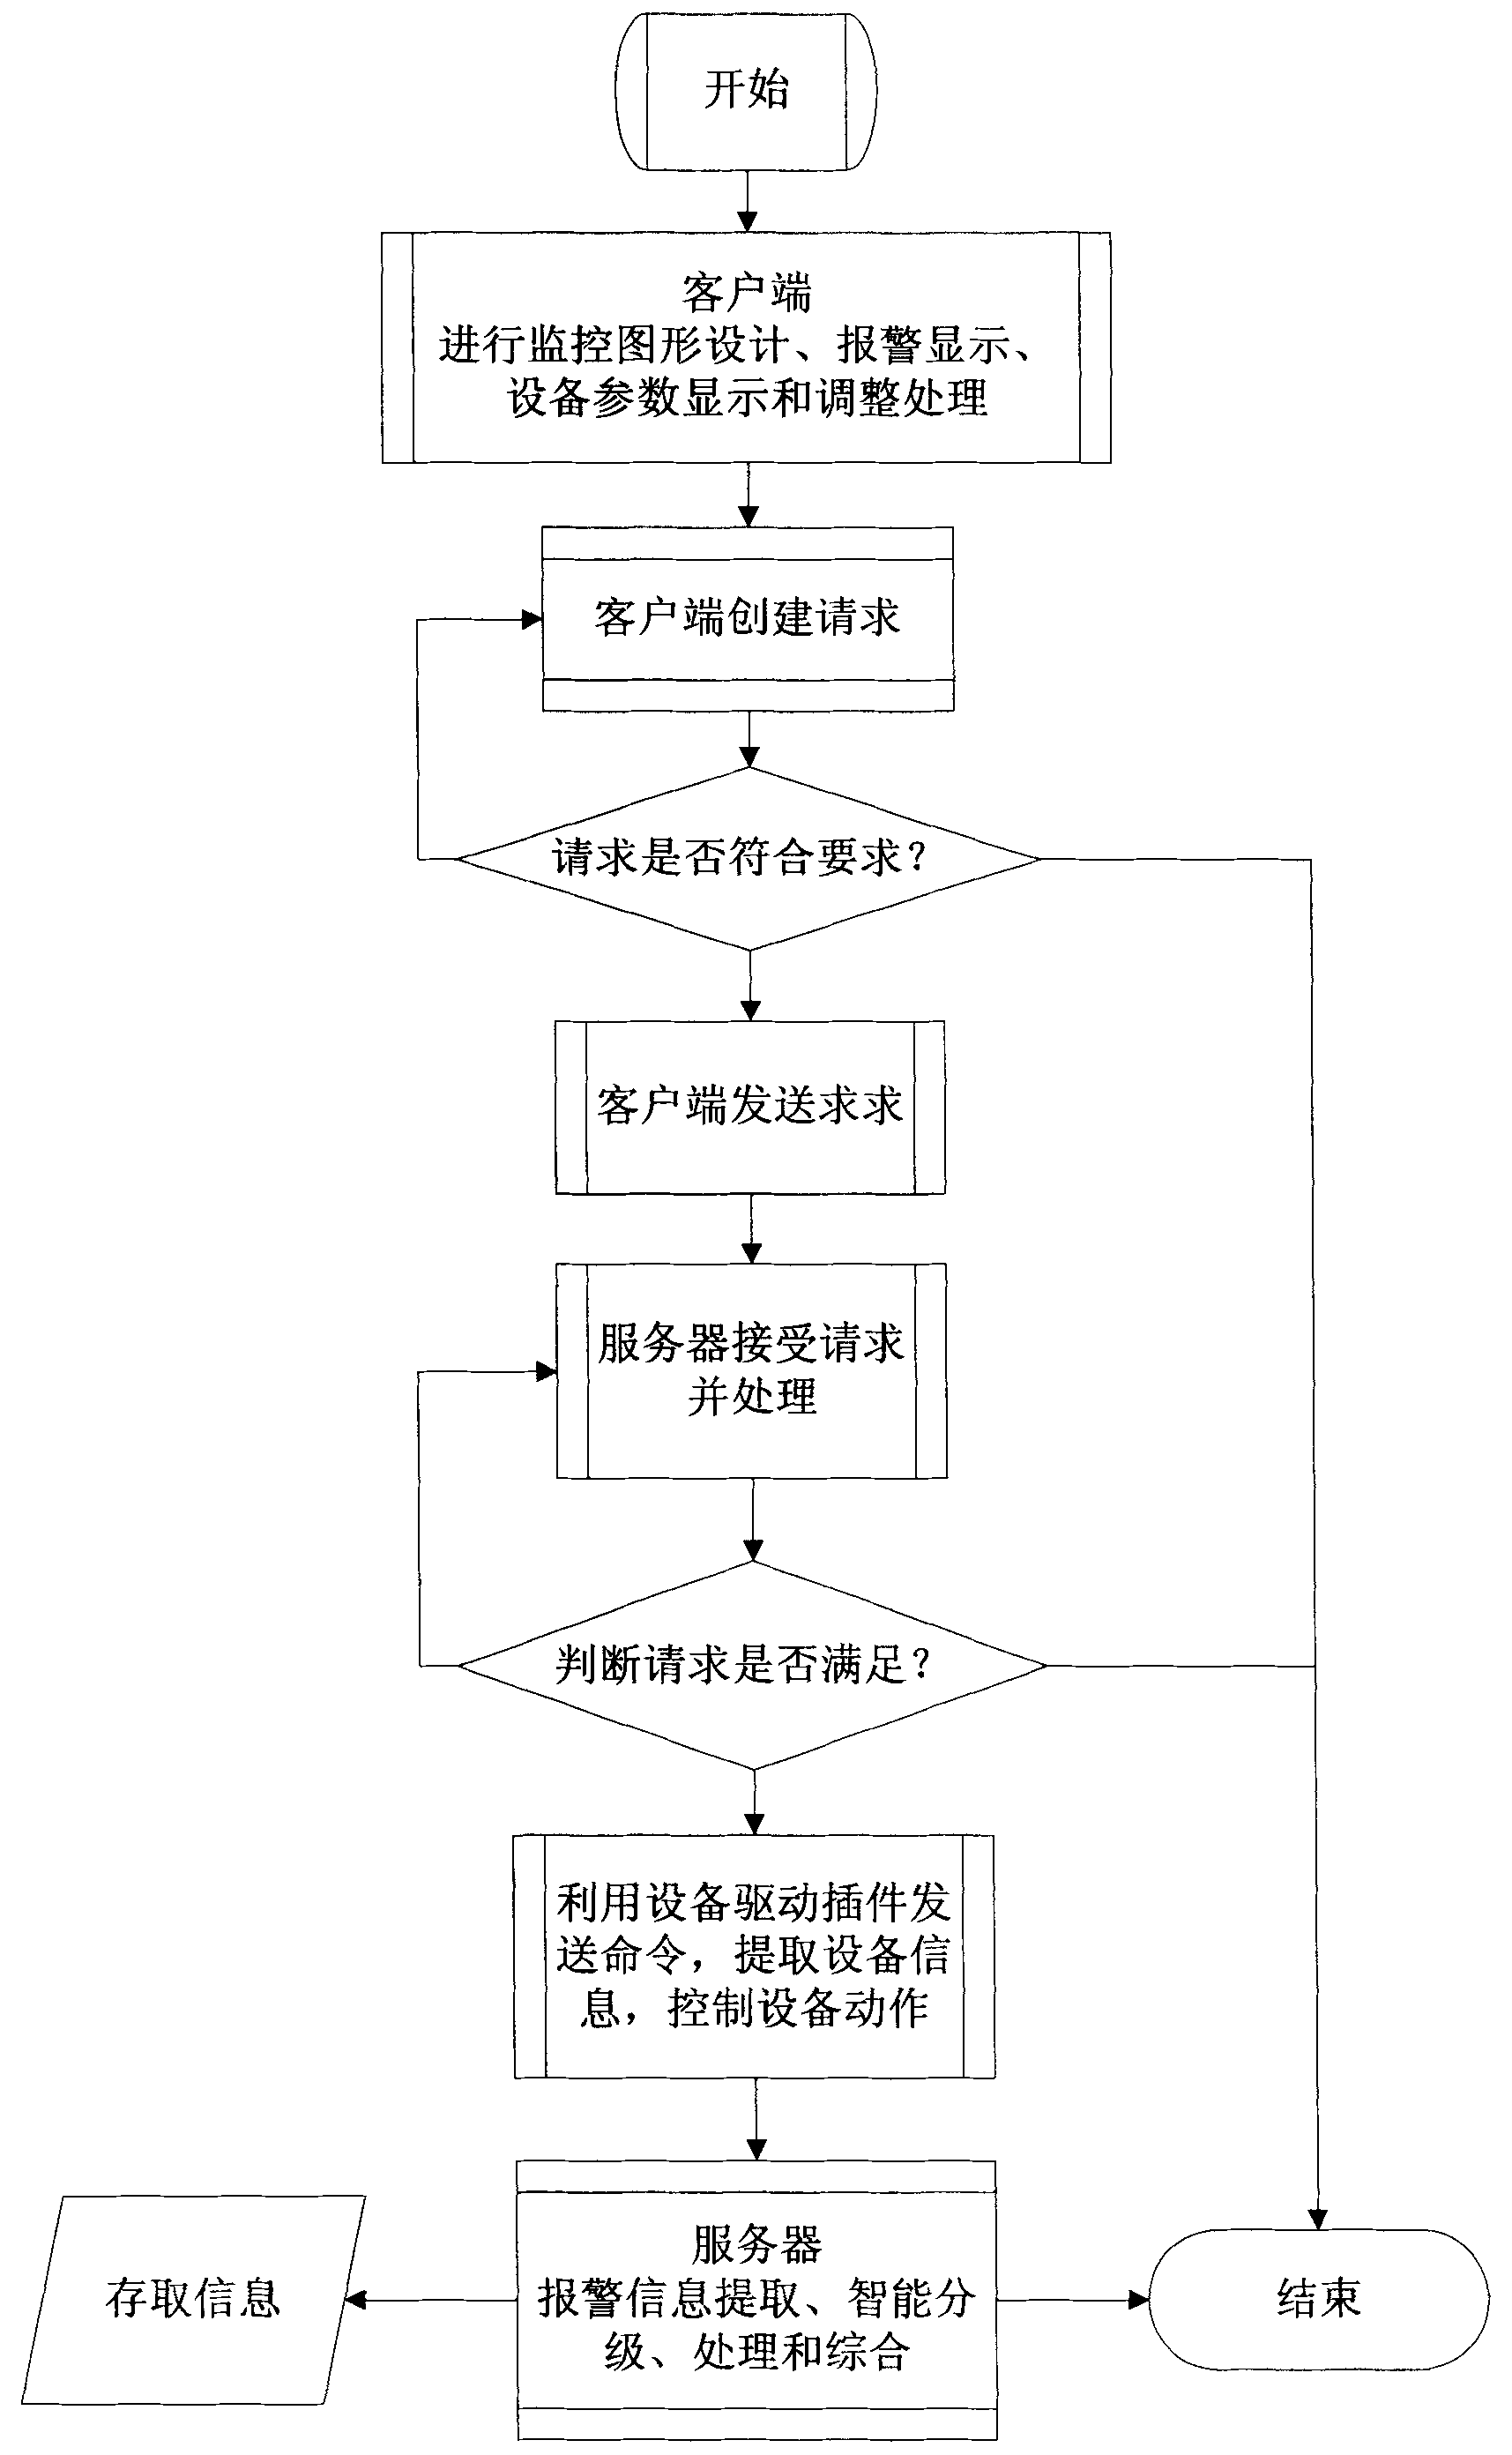 An alarm processing system and method